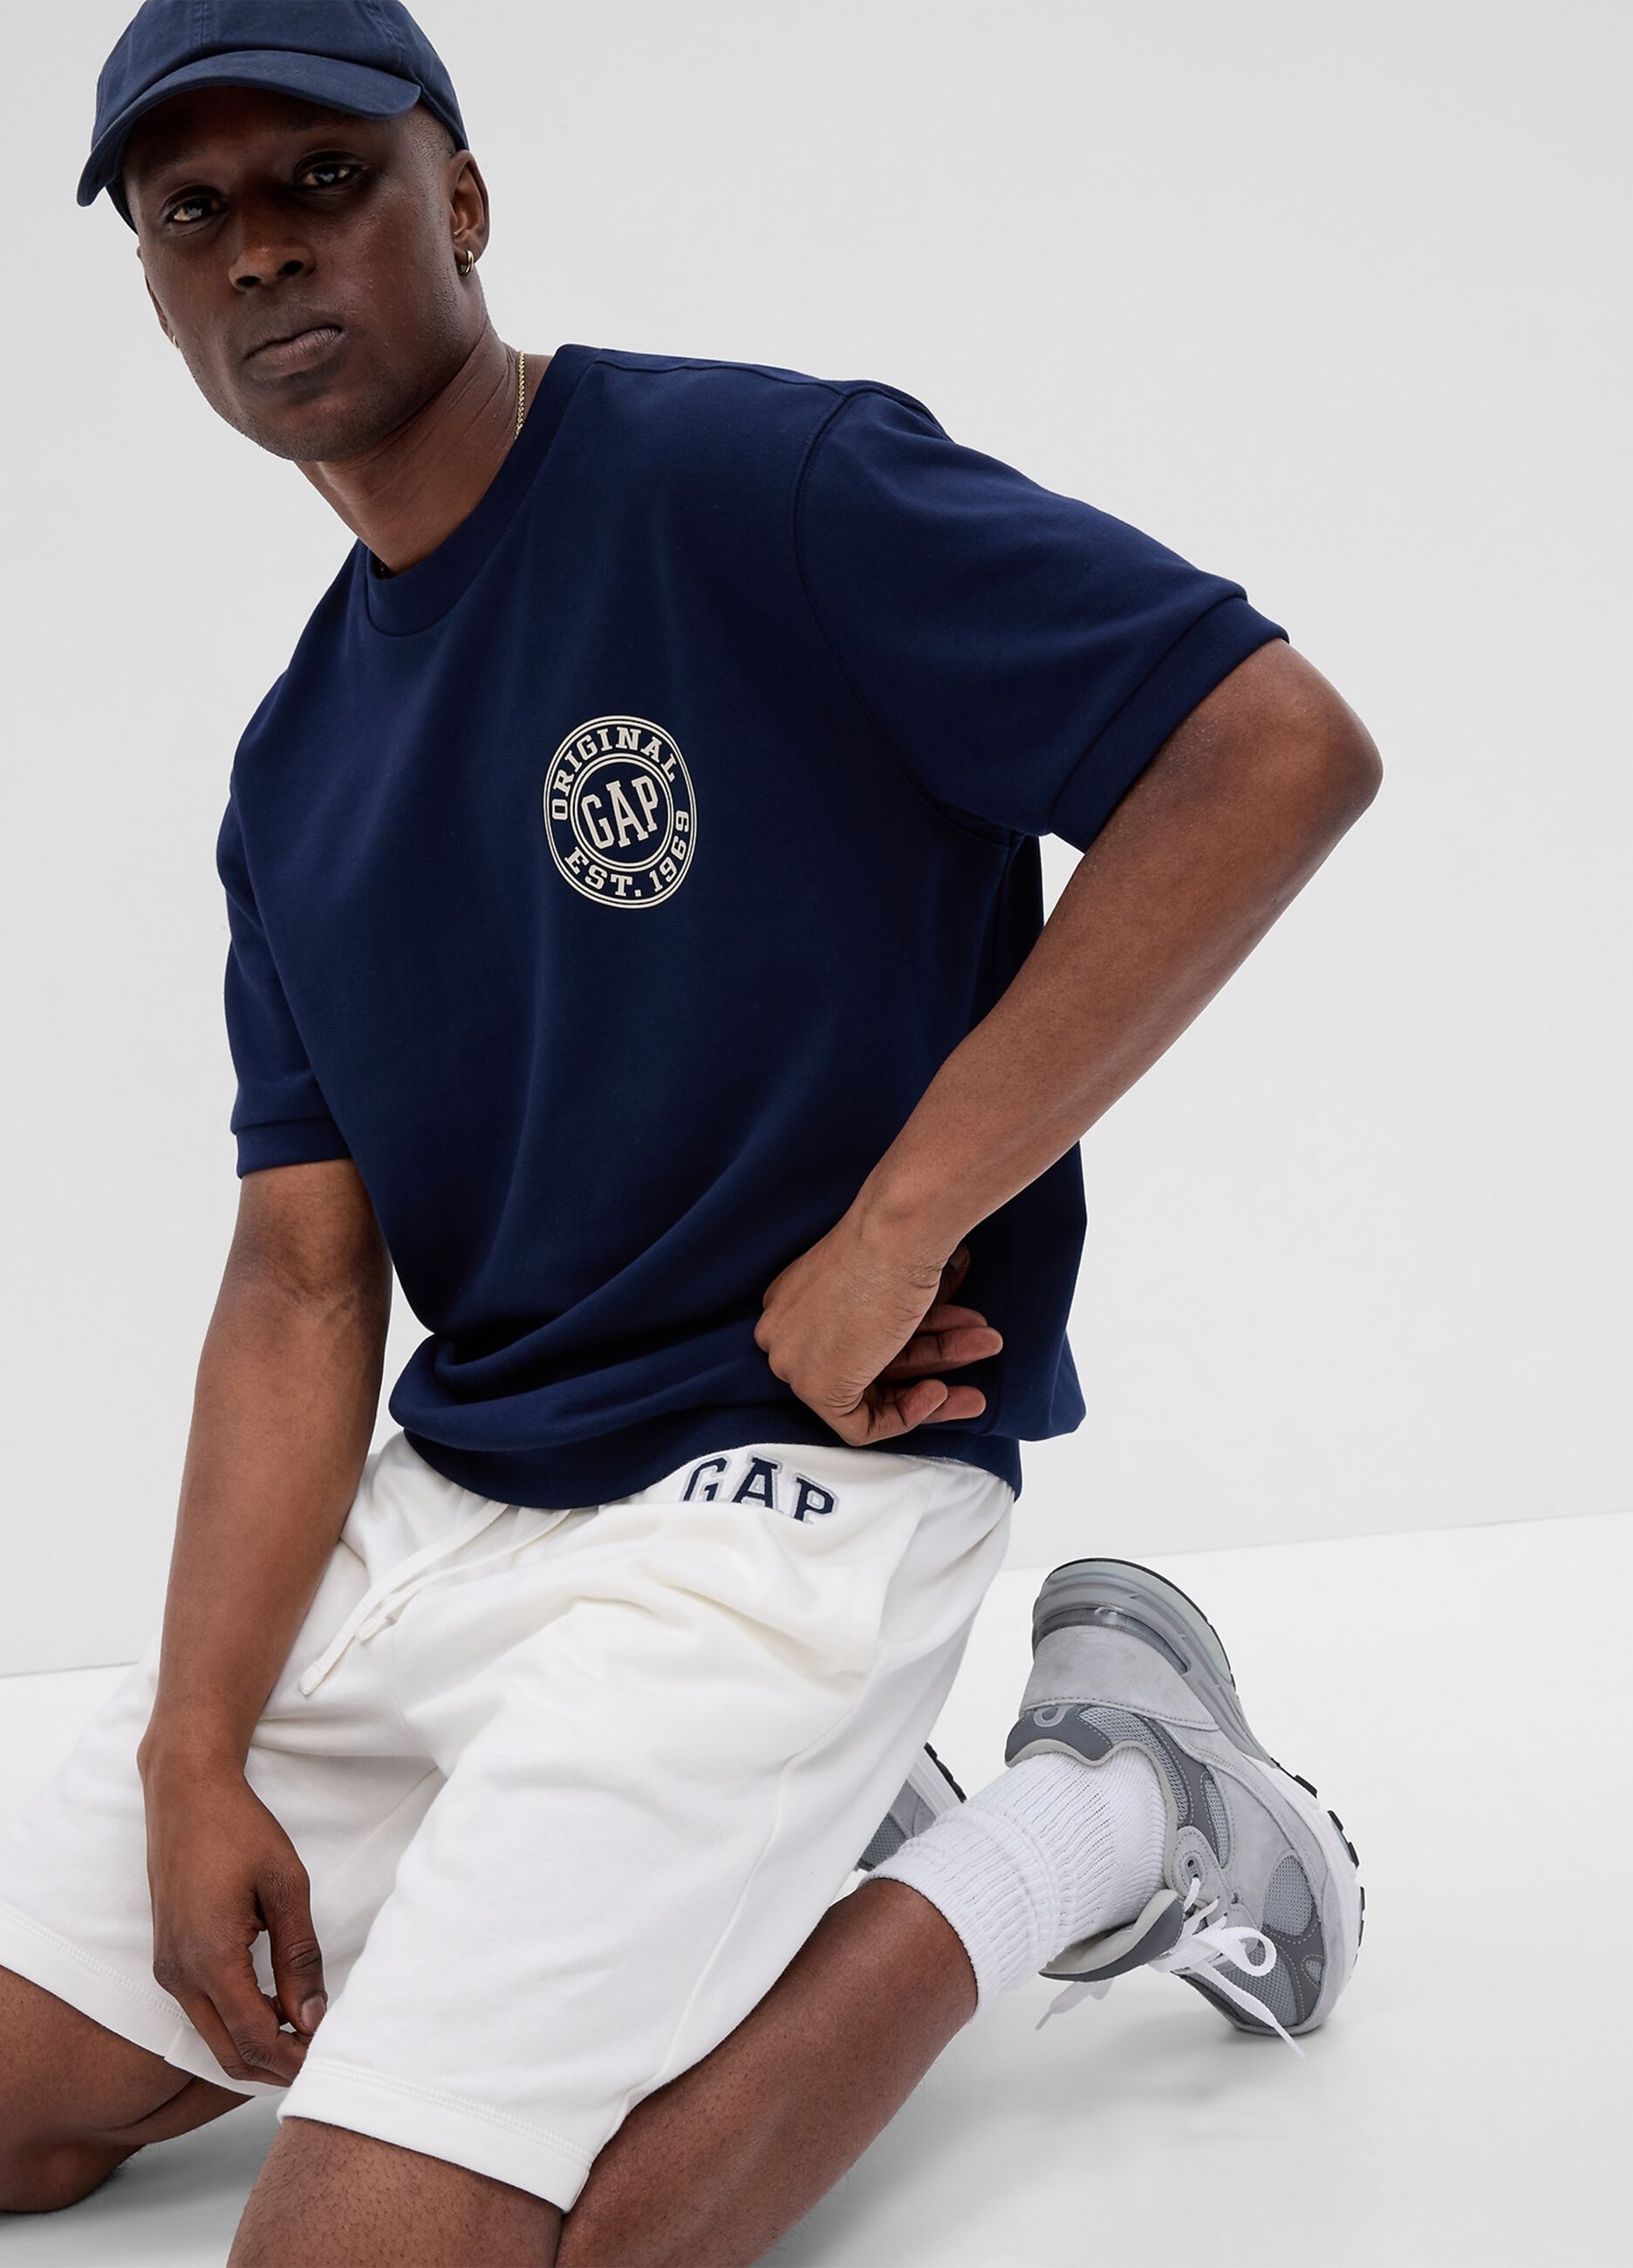 Plush Bermuda joggers with embroidered logo